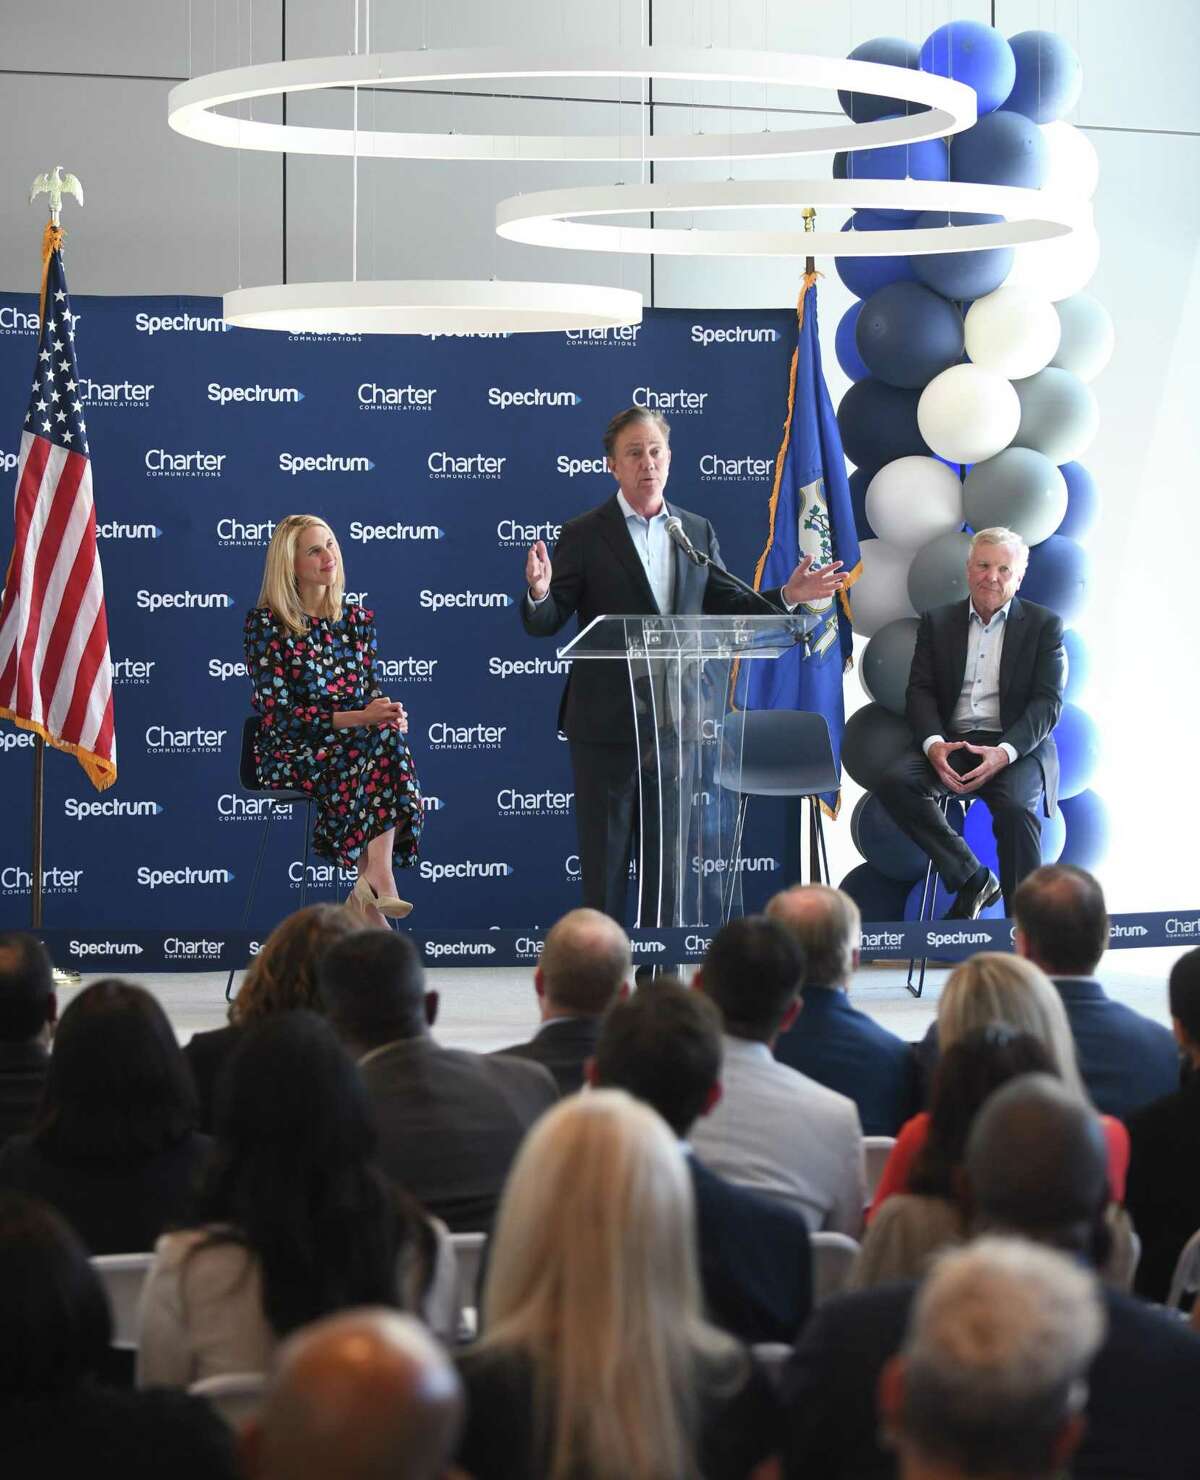 Connecticut Gov. Ned Lamont speaks at the podium beside Stamford Mayor Caroline Simmons and Charter Communications Chairman and CEO Tom Rutledge during the ribbon-cutting at the Charter Communications corporate headquarters in Stamford, Conn. Monday, June 6, 2022. Connecticut Gov. Ned Lamont and Stamford Mayor Caroline Simmons joined Charter leadership to cut the ribbon on the second building of the new Charter headquarters. Building 1, which opened in March 2021, covers about 532,000 square feet across 14 floors, Building 2 encompasses about 288,000 square feet across nine floors, and the three-story connecting structure contains about 94,000 square feet.